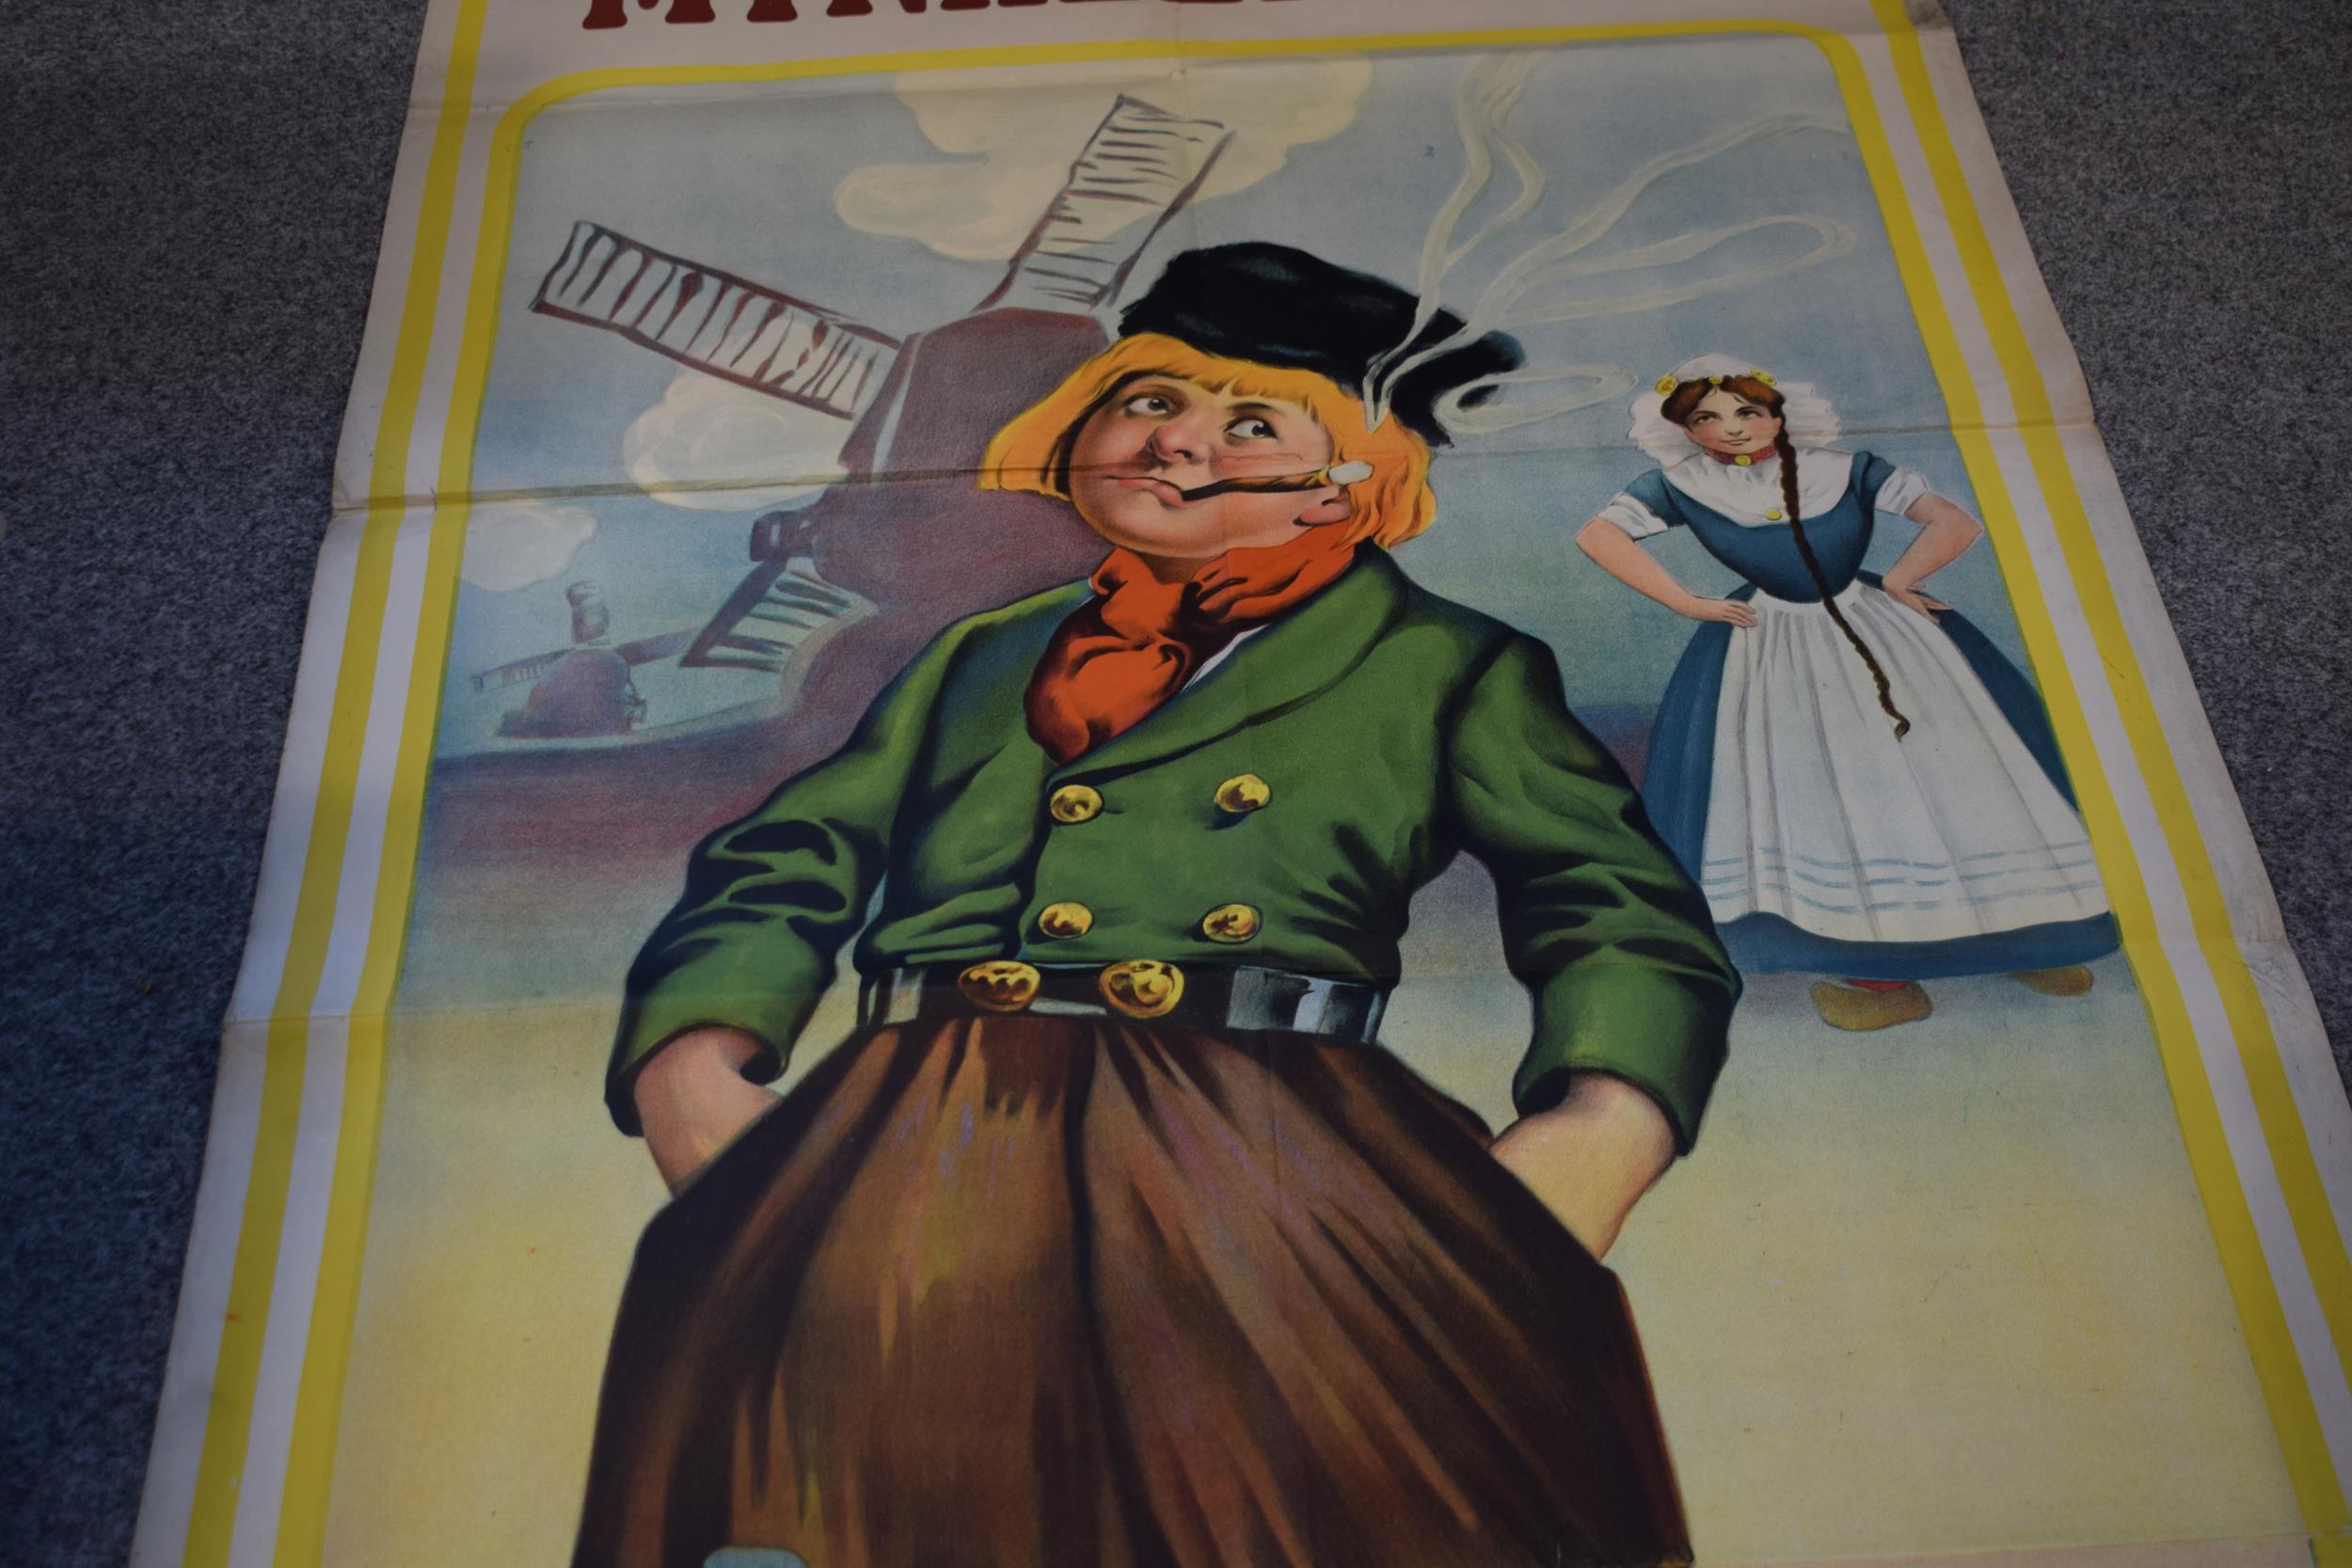 Original Colour Advertising Poster For Mynheer Jan Opera By Jacobowski c1924 in two separate - Image 4 of 7